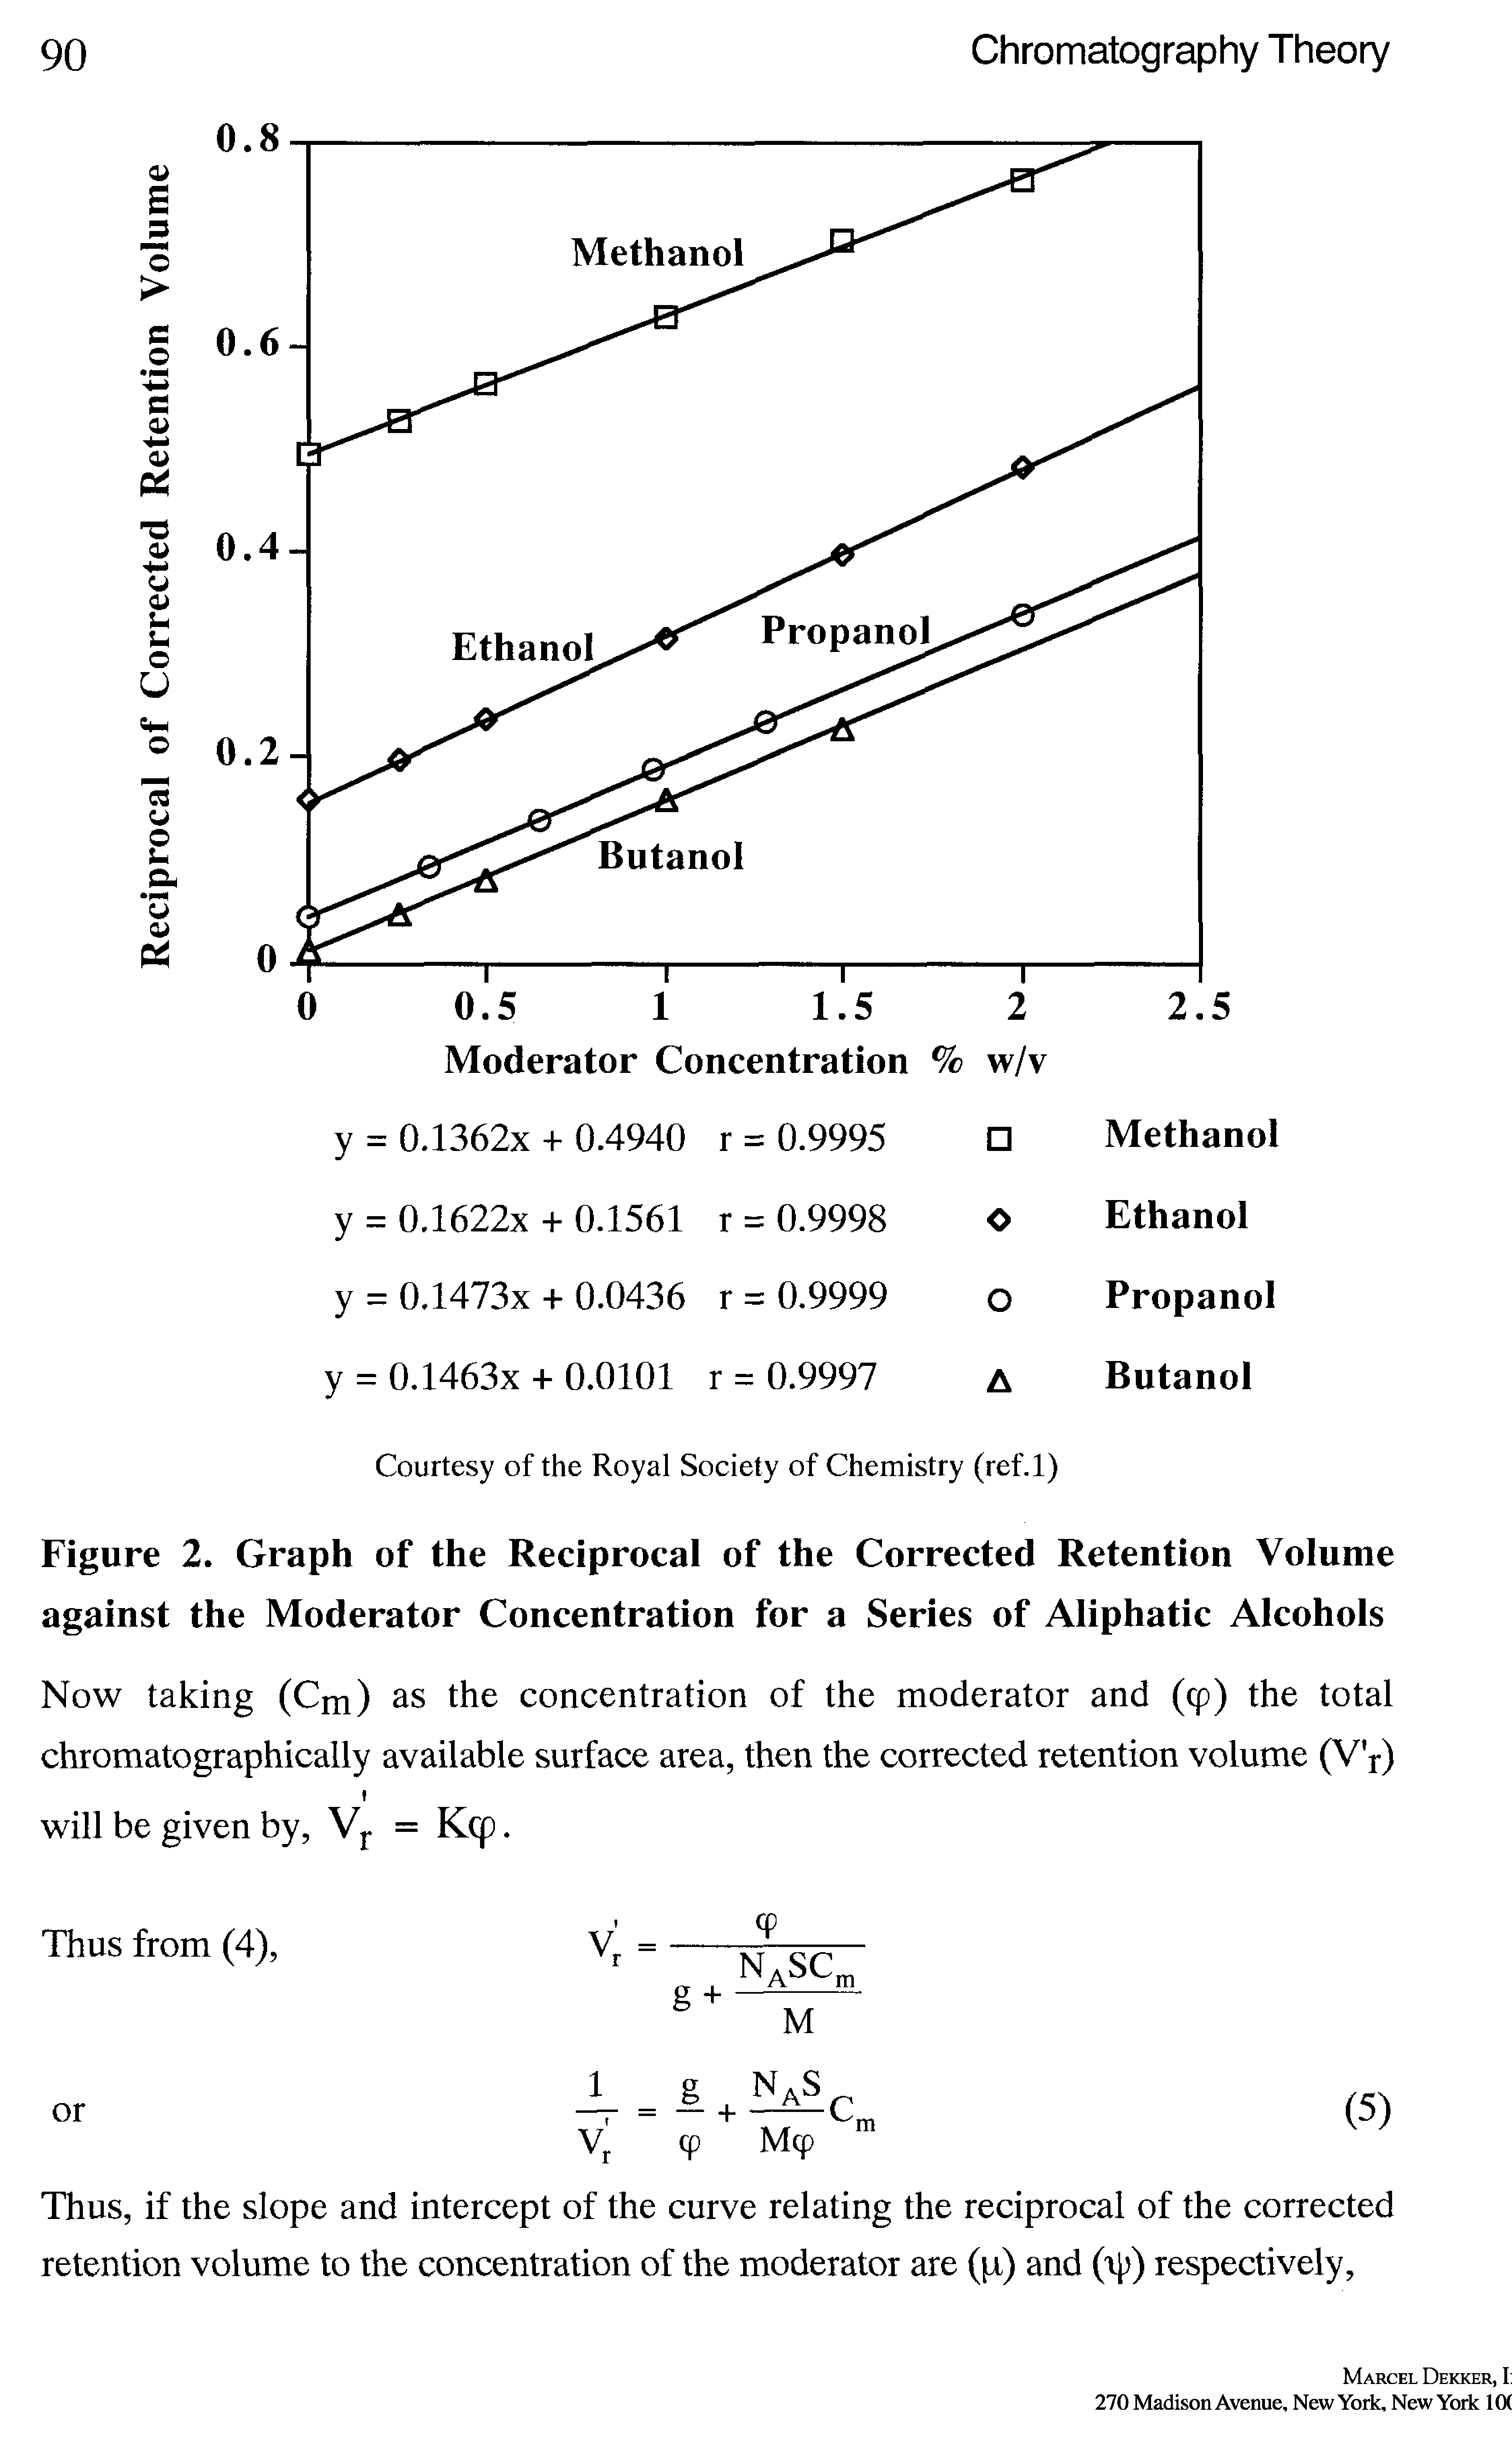 Figure 2. Graph of the Reciprocal of the Corrected Retention Volume against the Moderator Concentration for a Series of Aliphatic Alcohols...